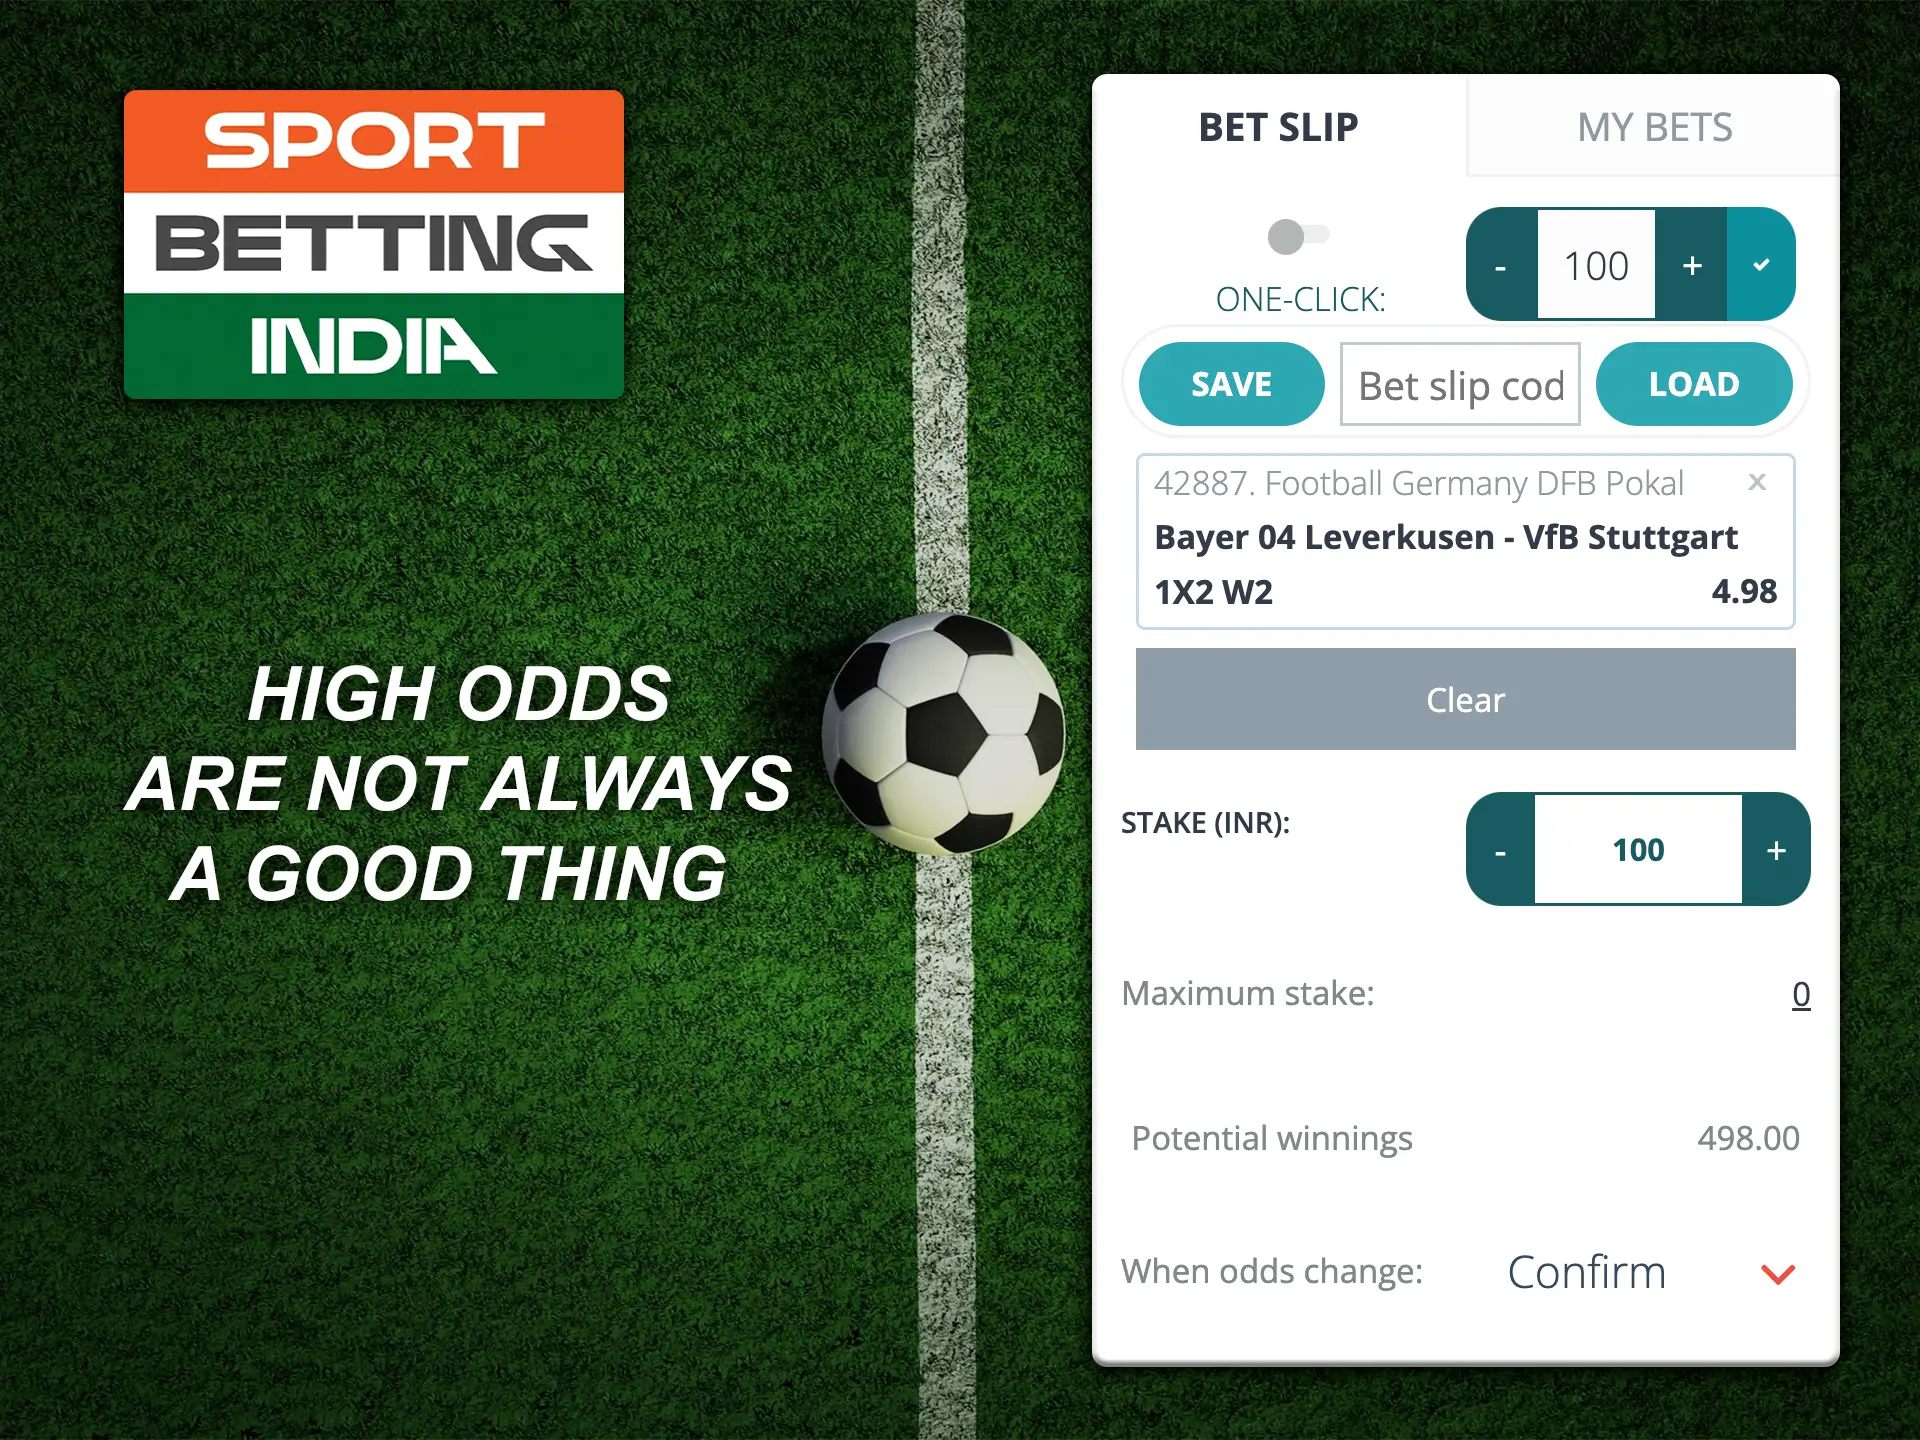 Carefully weigh all factors before betting on a football match and don't rely on high odds.